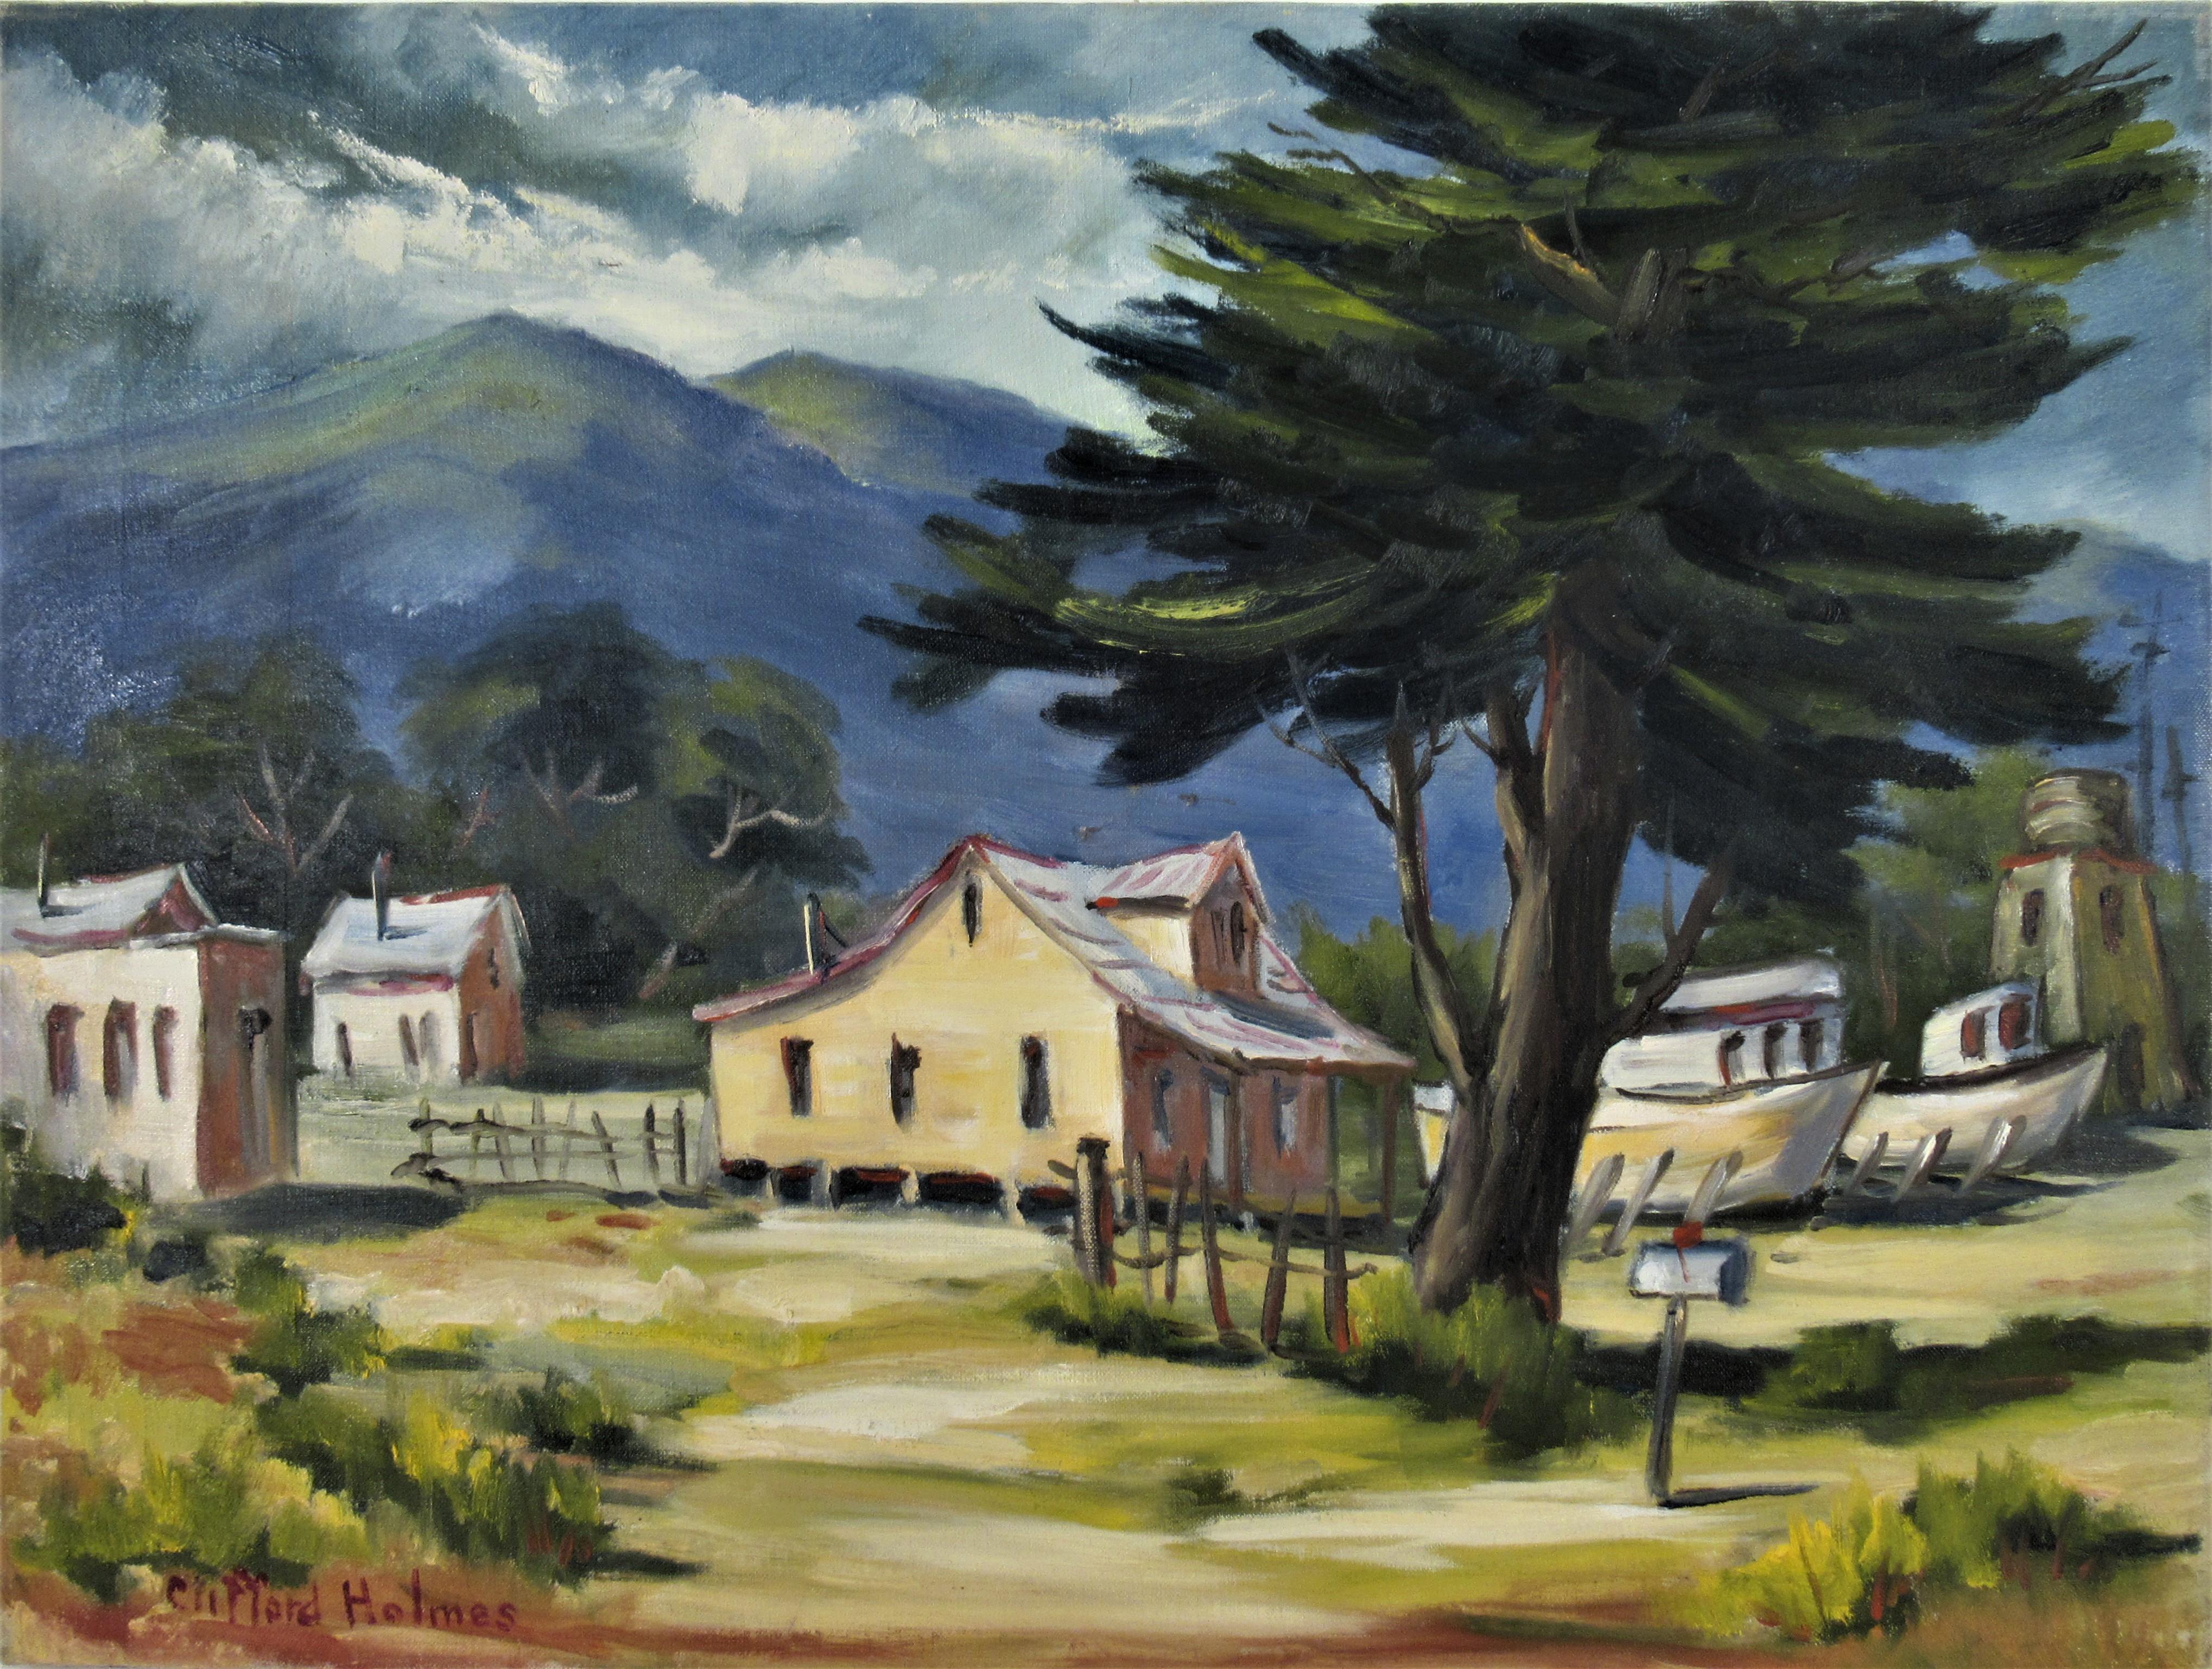 Clifford Holmes Landscape Painting - Princeton, California